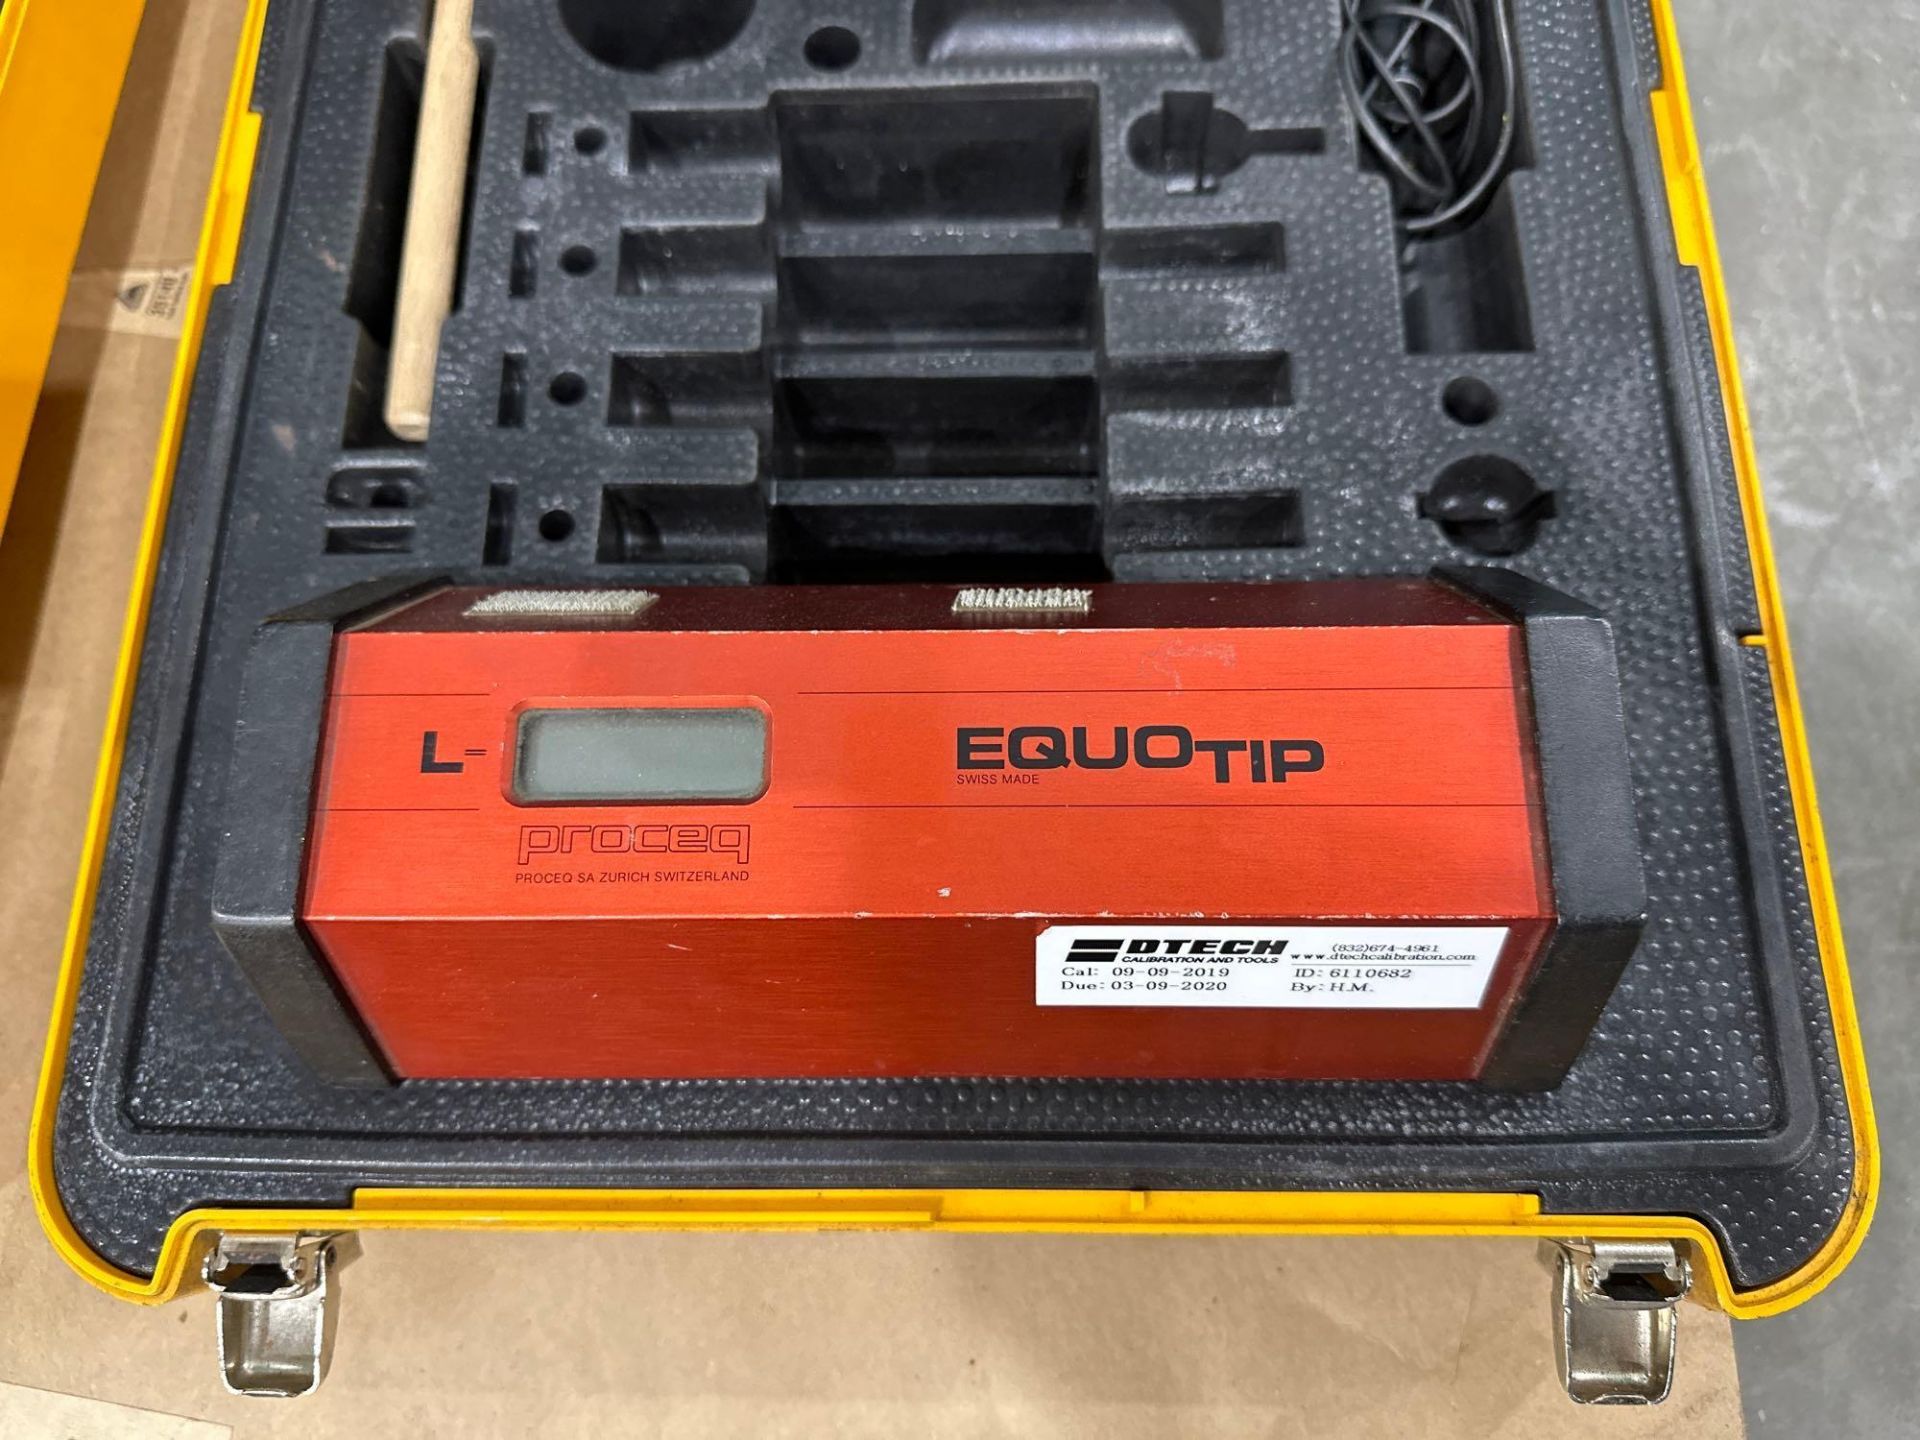 Lot of 2 Proceq Equotip Portable Hardness Tester Basic Unit D, in cases - Image 11 of 14